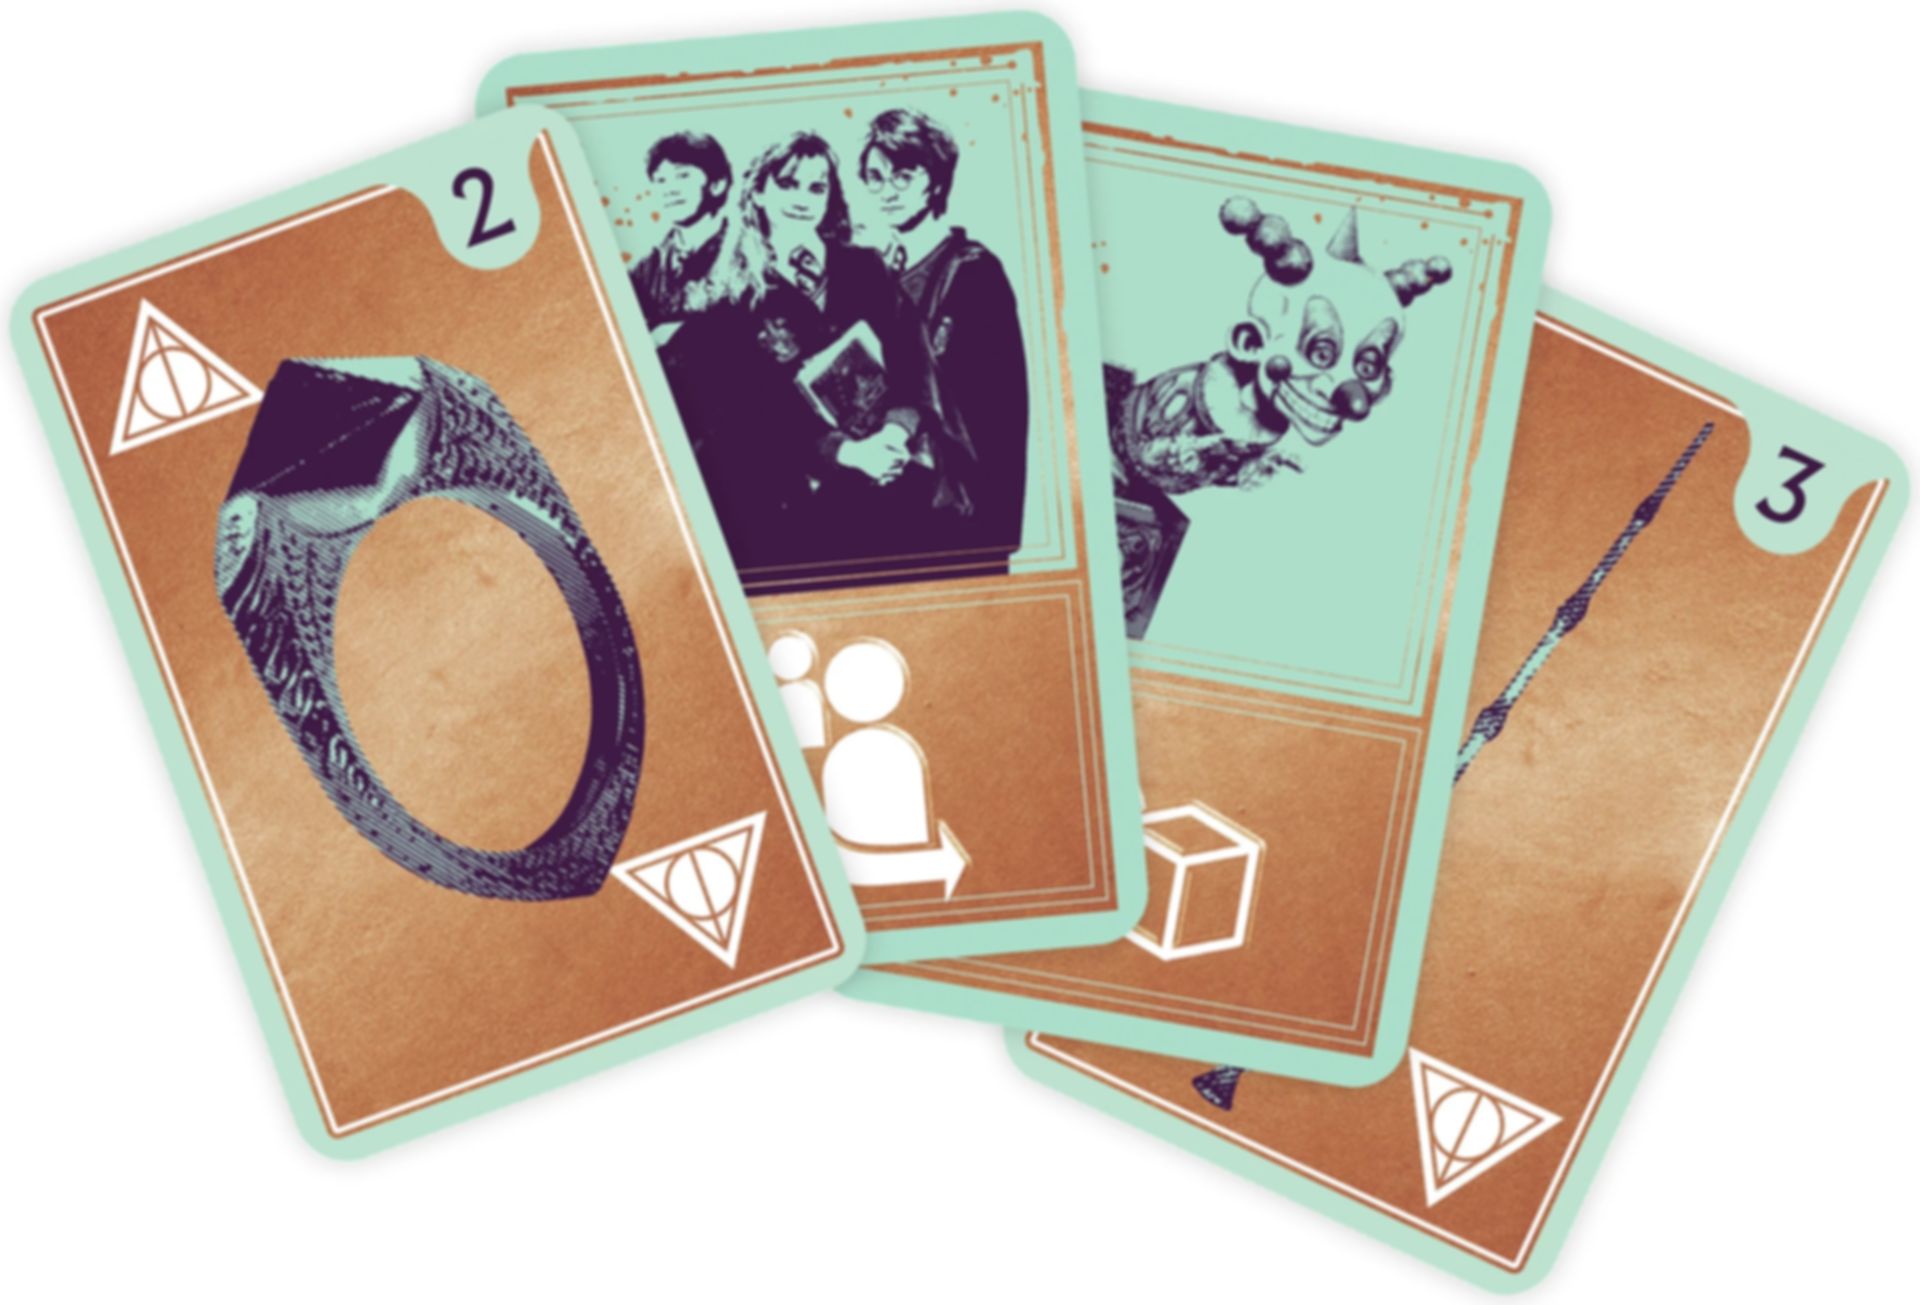 Harry Potter: Seek The Deathly Hallows cards